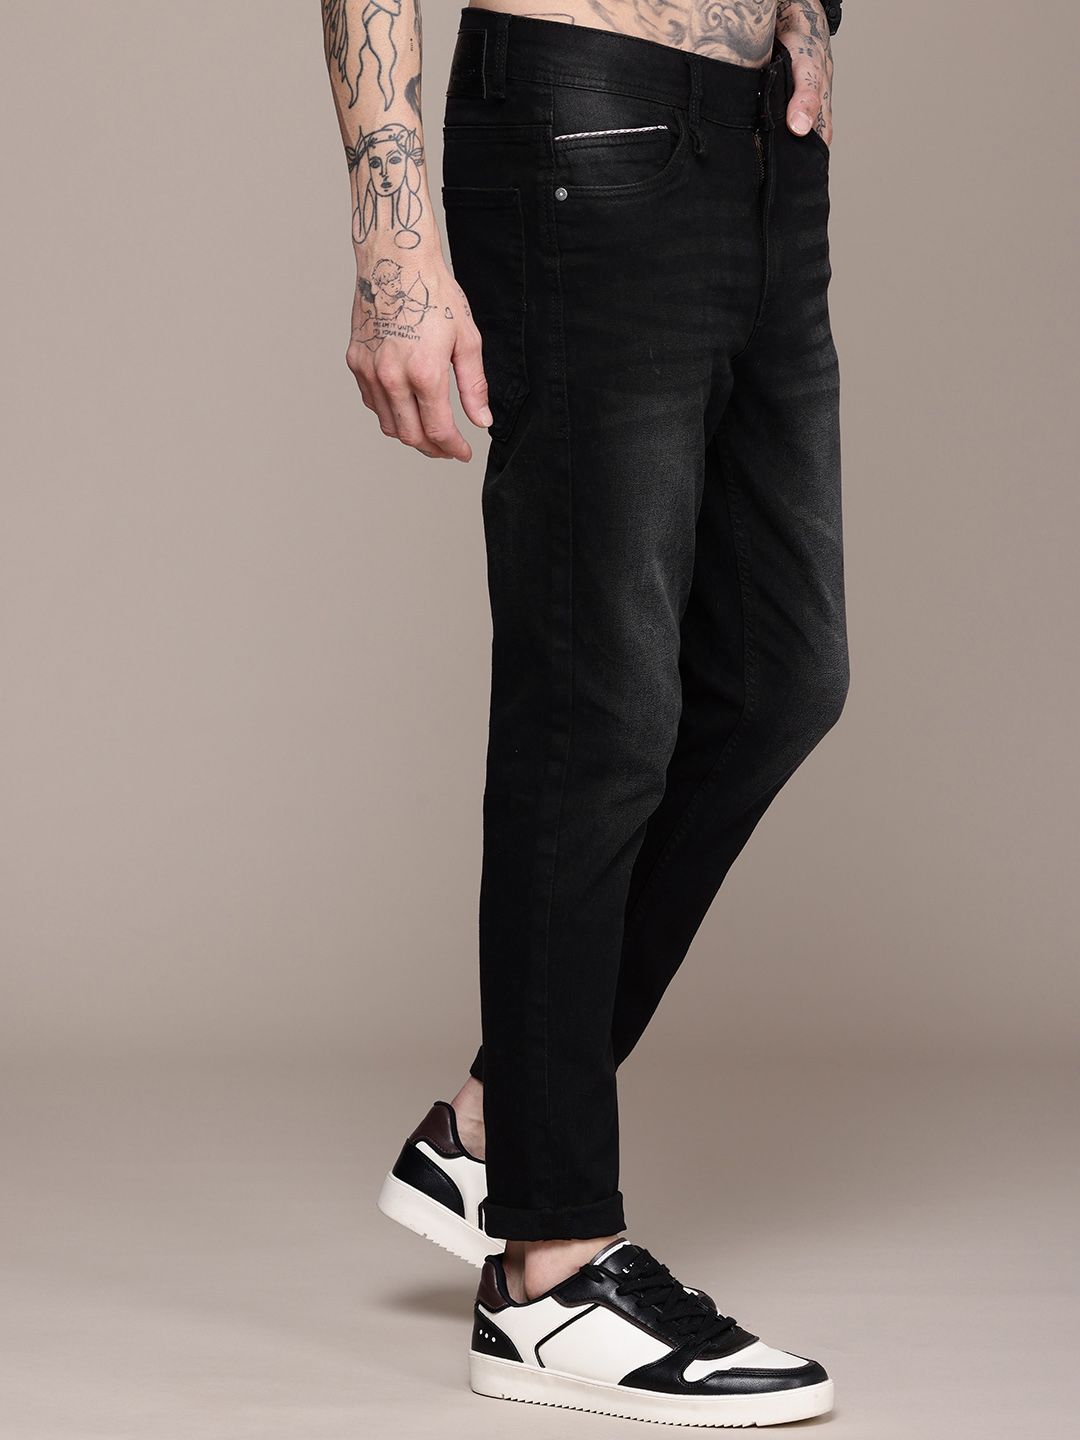 The Roadster Life Co.Men Slim Tapered Fit Jeans